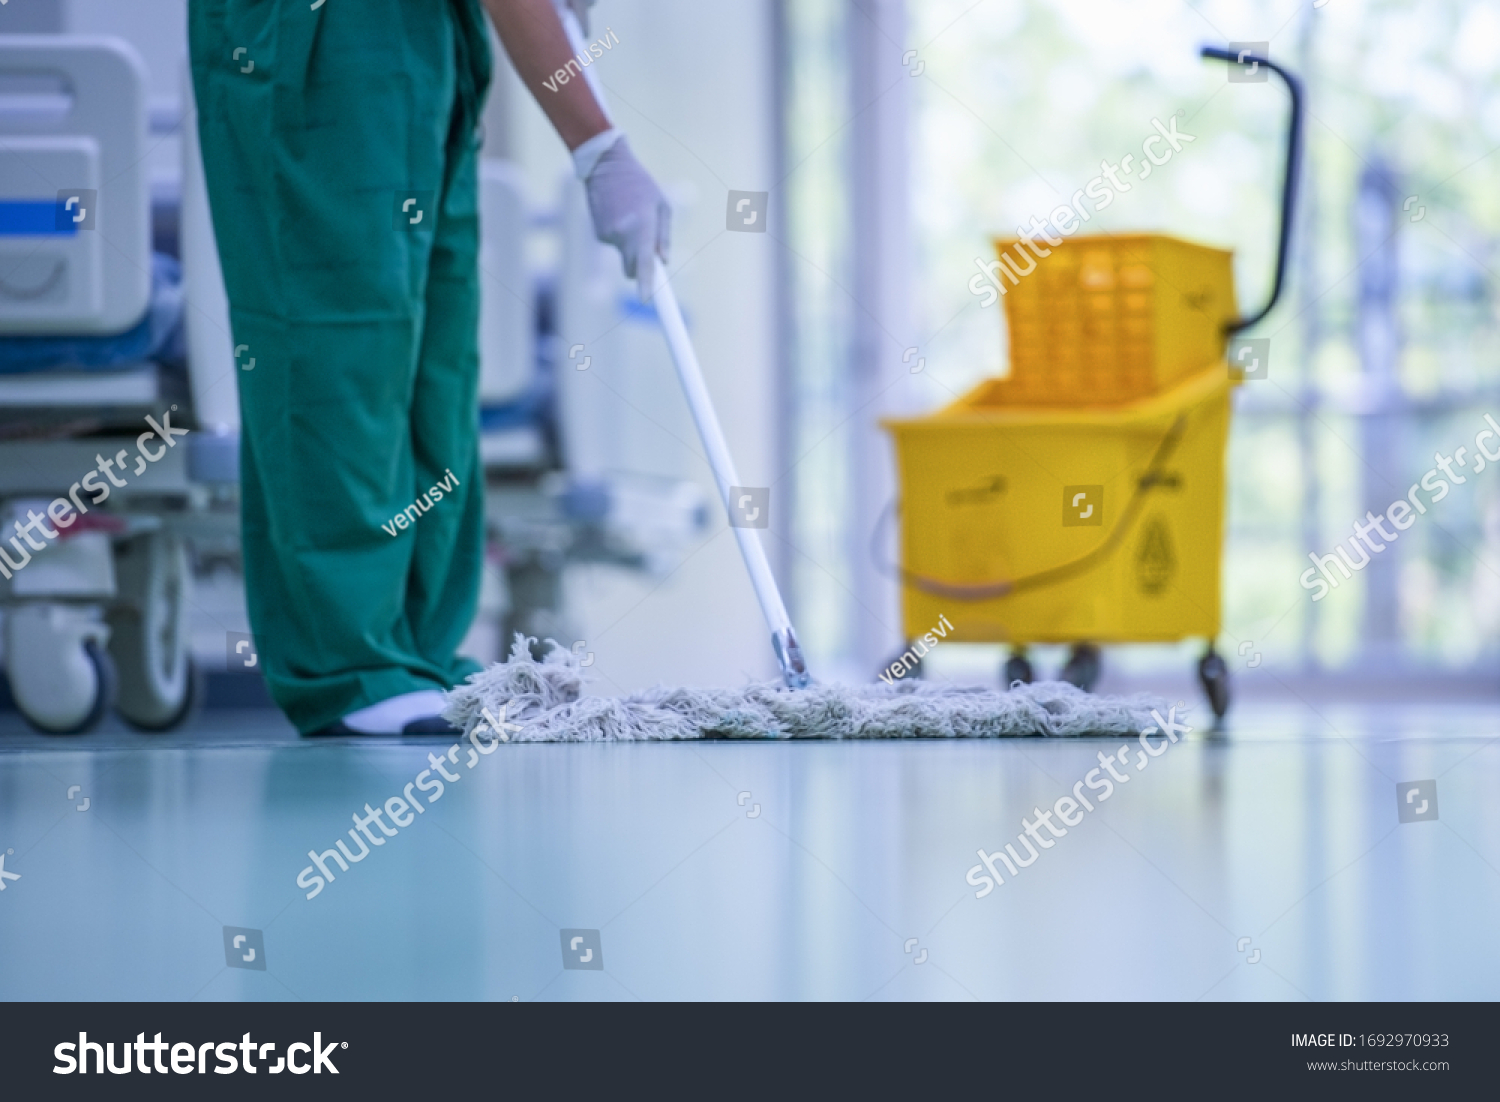 Blurred hospital images, Clean and sanitize, Cleaner, Hospital cleaning,Cleaning the hospital floor. Floor care and cleaning services with washing mop in sterile factory or clean hospital. #1692970933